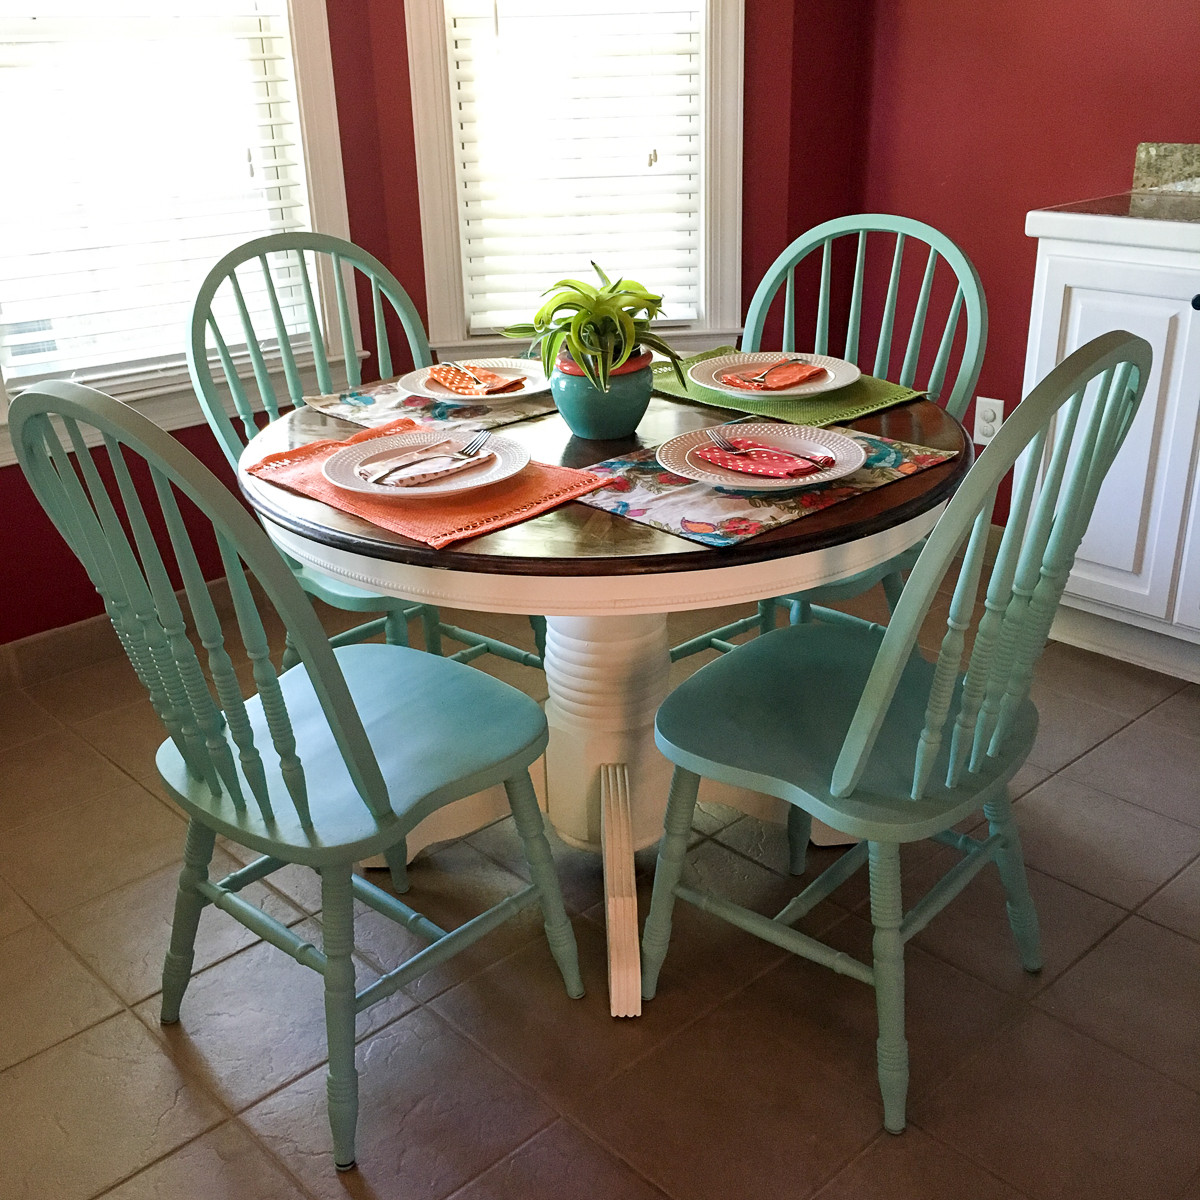 Kitchen Table White
 Turquoise and White Kitchen Table Round Table The